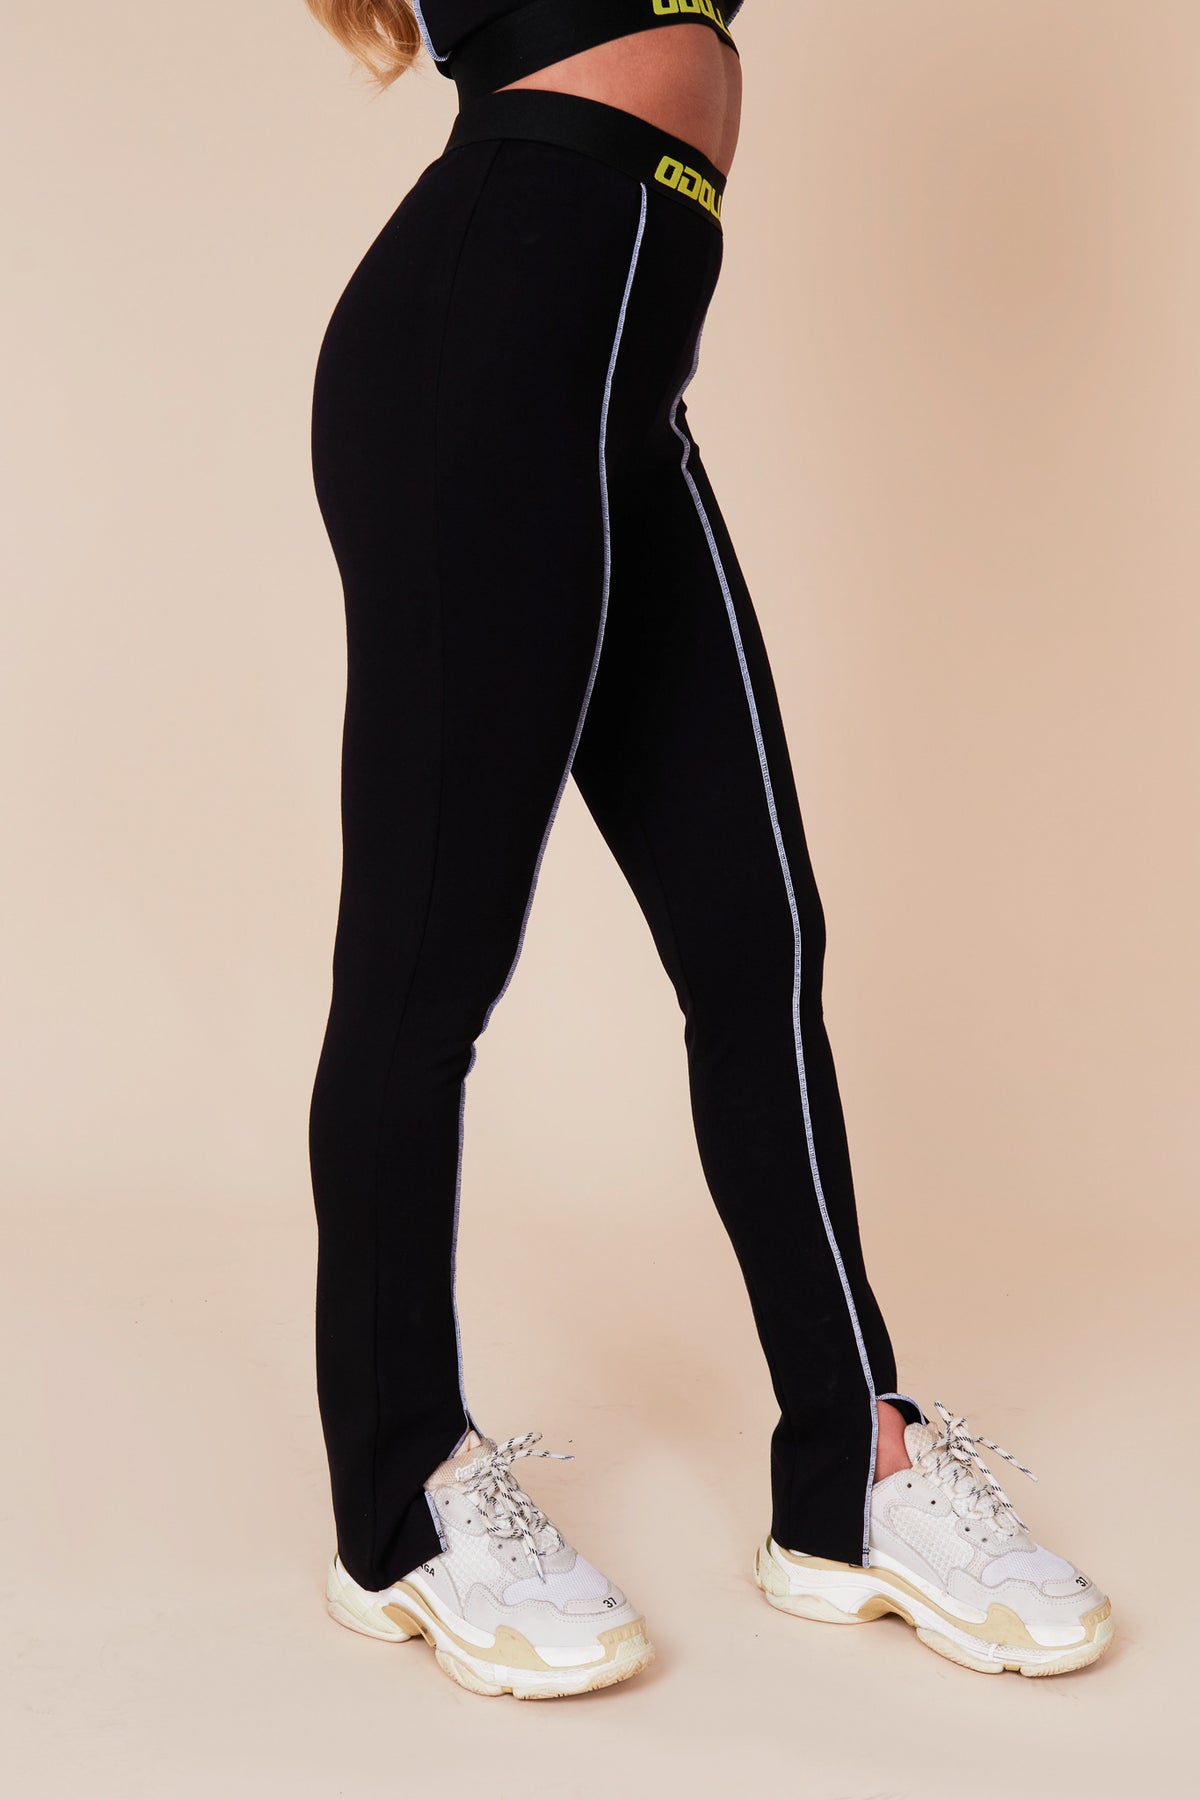 ODolls Collection  Shop the Velocity Legging in Black